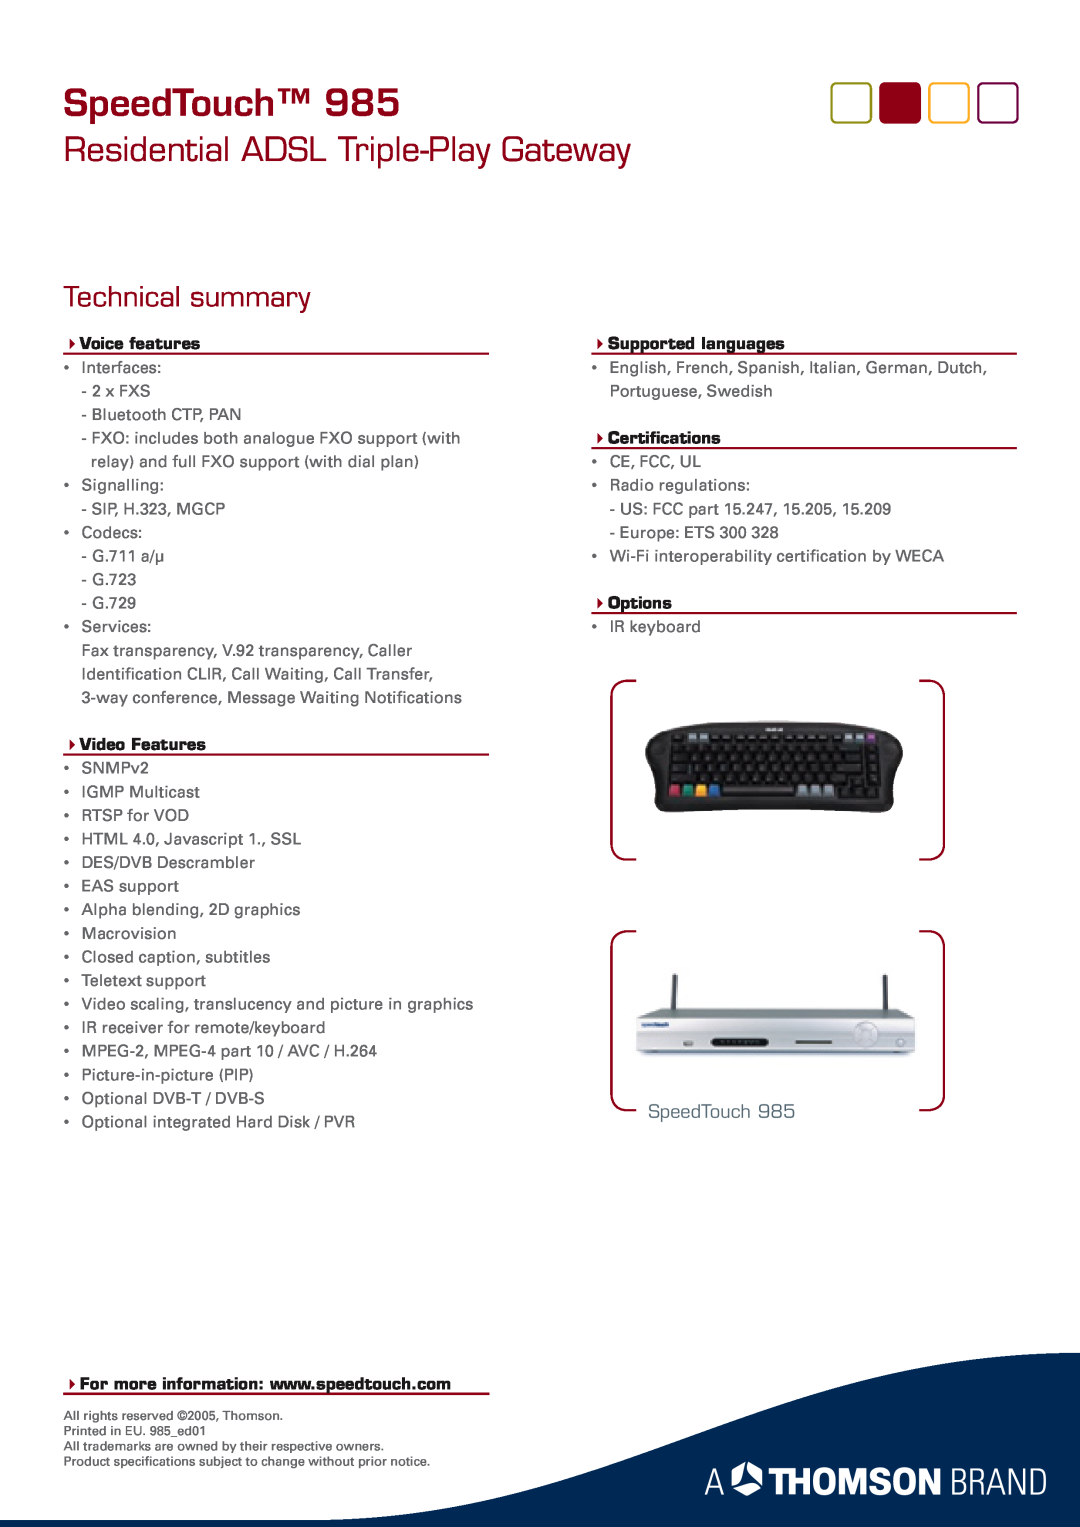 RCA 985 4Voice features, 4Video Features, 4Supported languages, 4Certiﬁcations, 4Options, SpeedTouch, Technical summary 